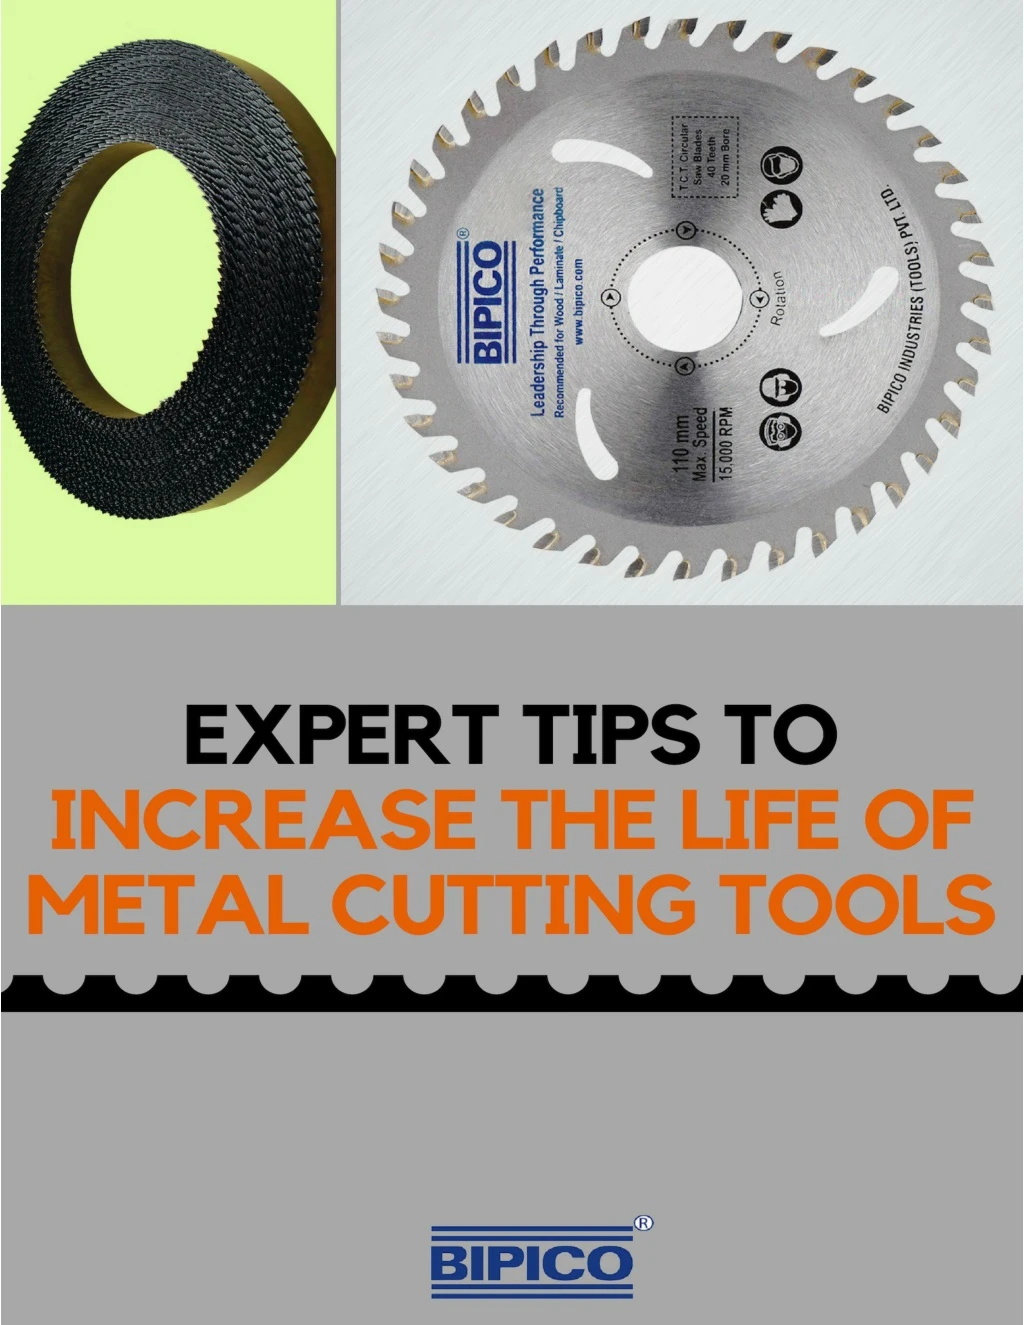 expert tips to increase the life of metal cutting